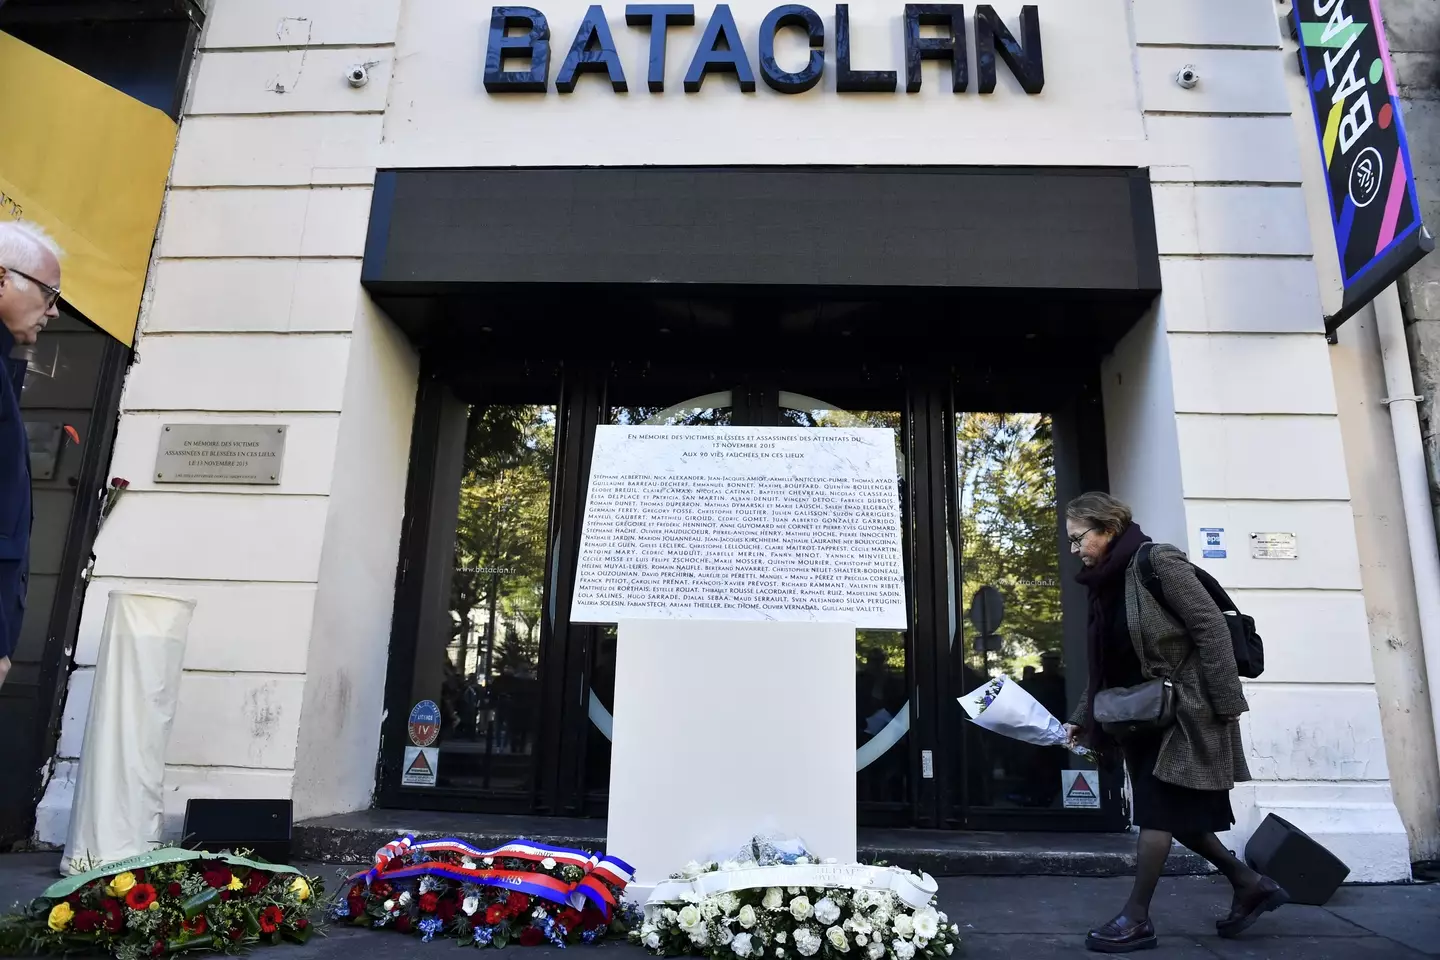 90 people lost their lives after terrorists attacked the Bataclan in 2015.